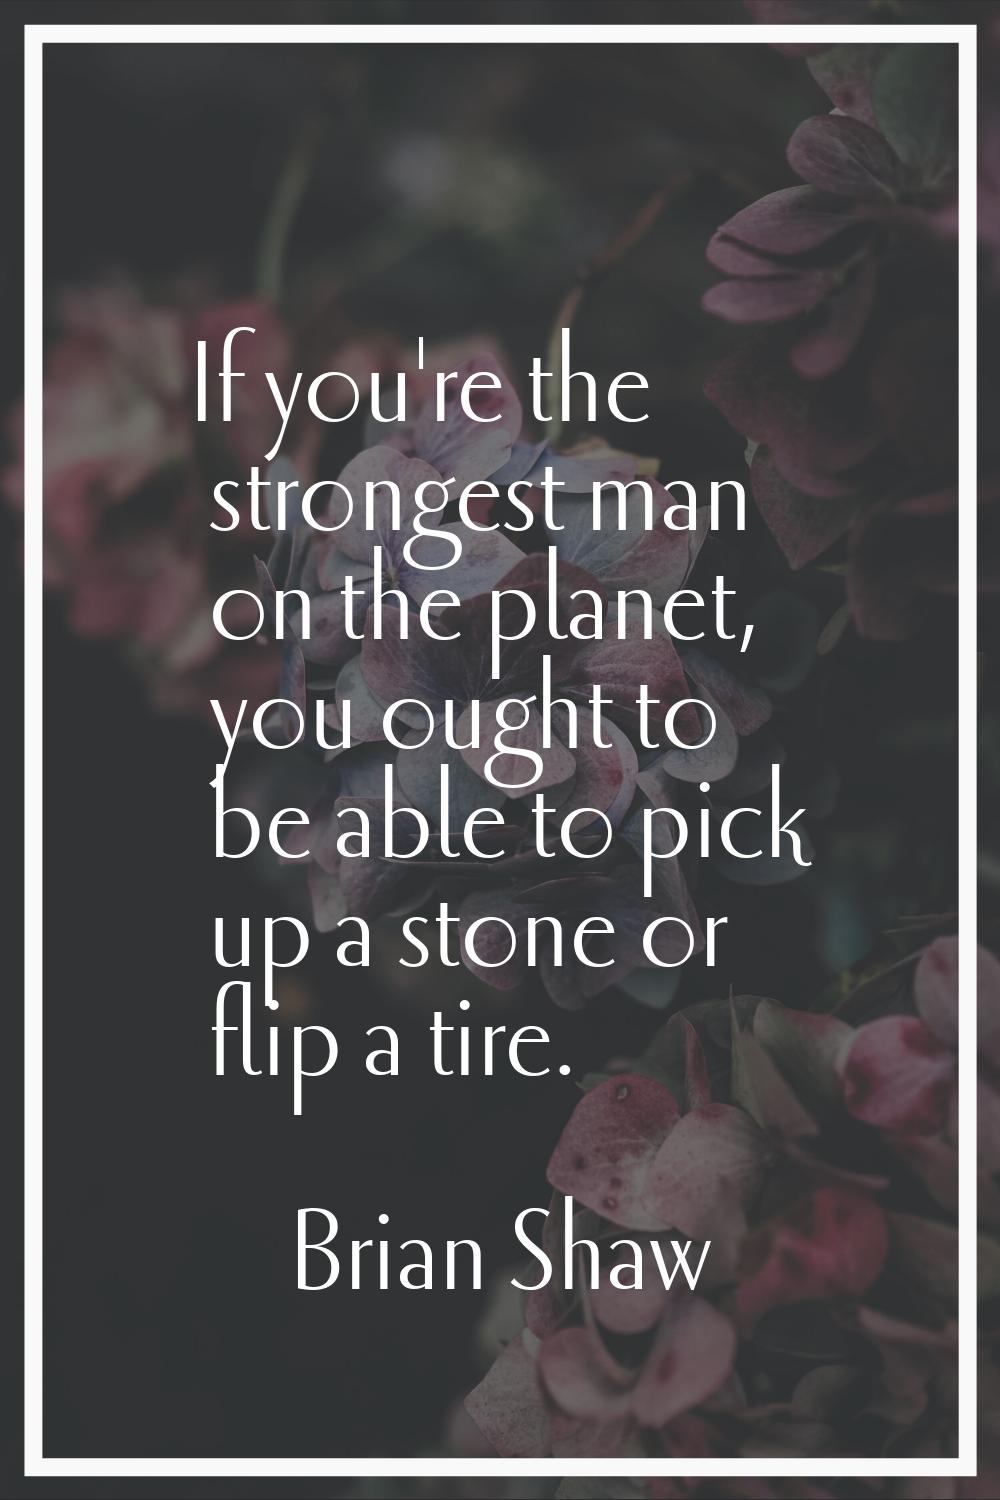 If you're the strongest man on the planet, you ought to be able to pick up a stone or flip a tire.